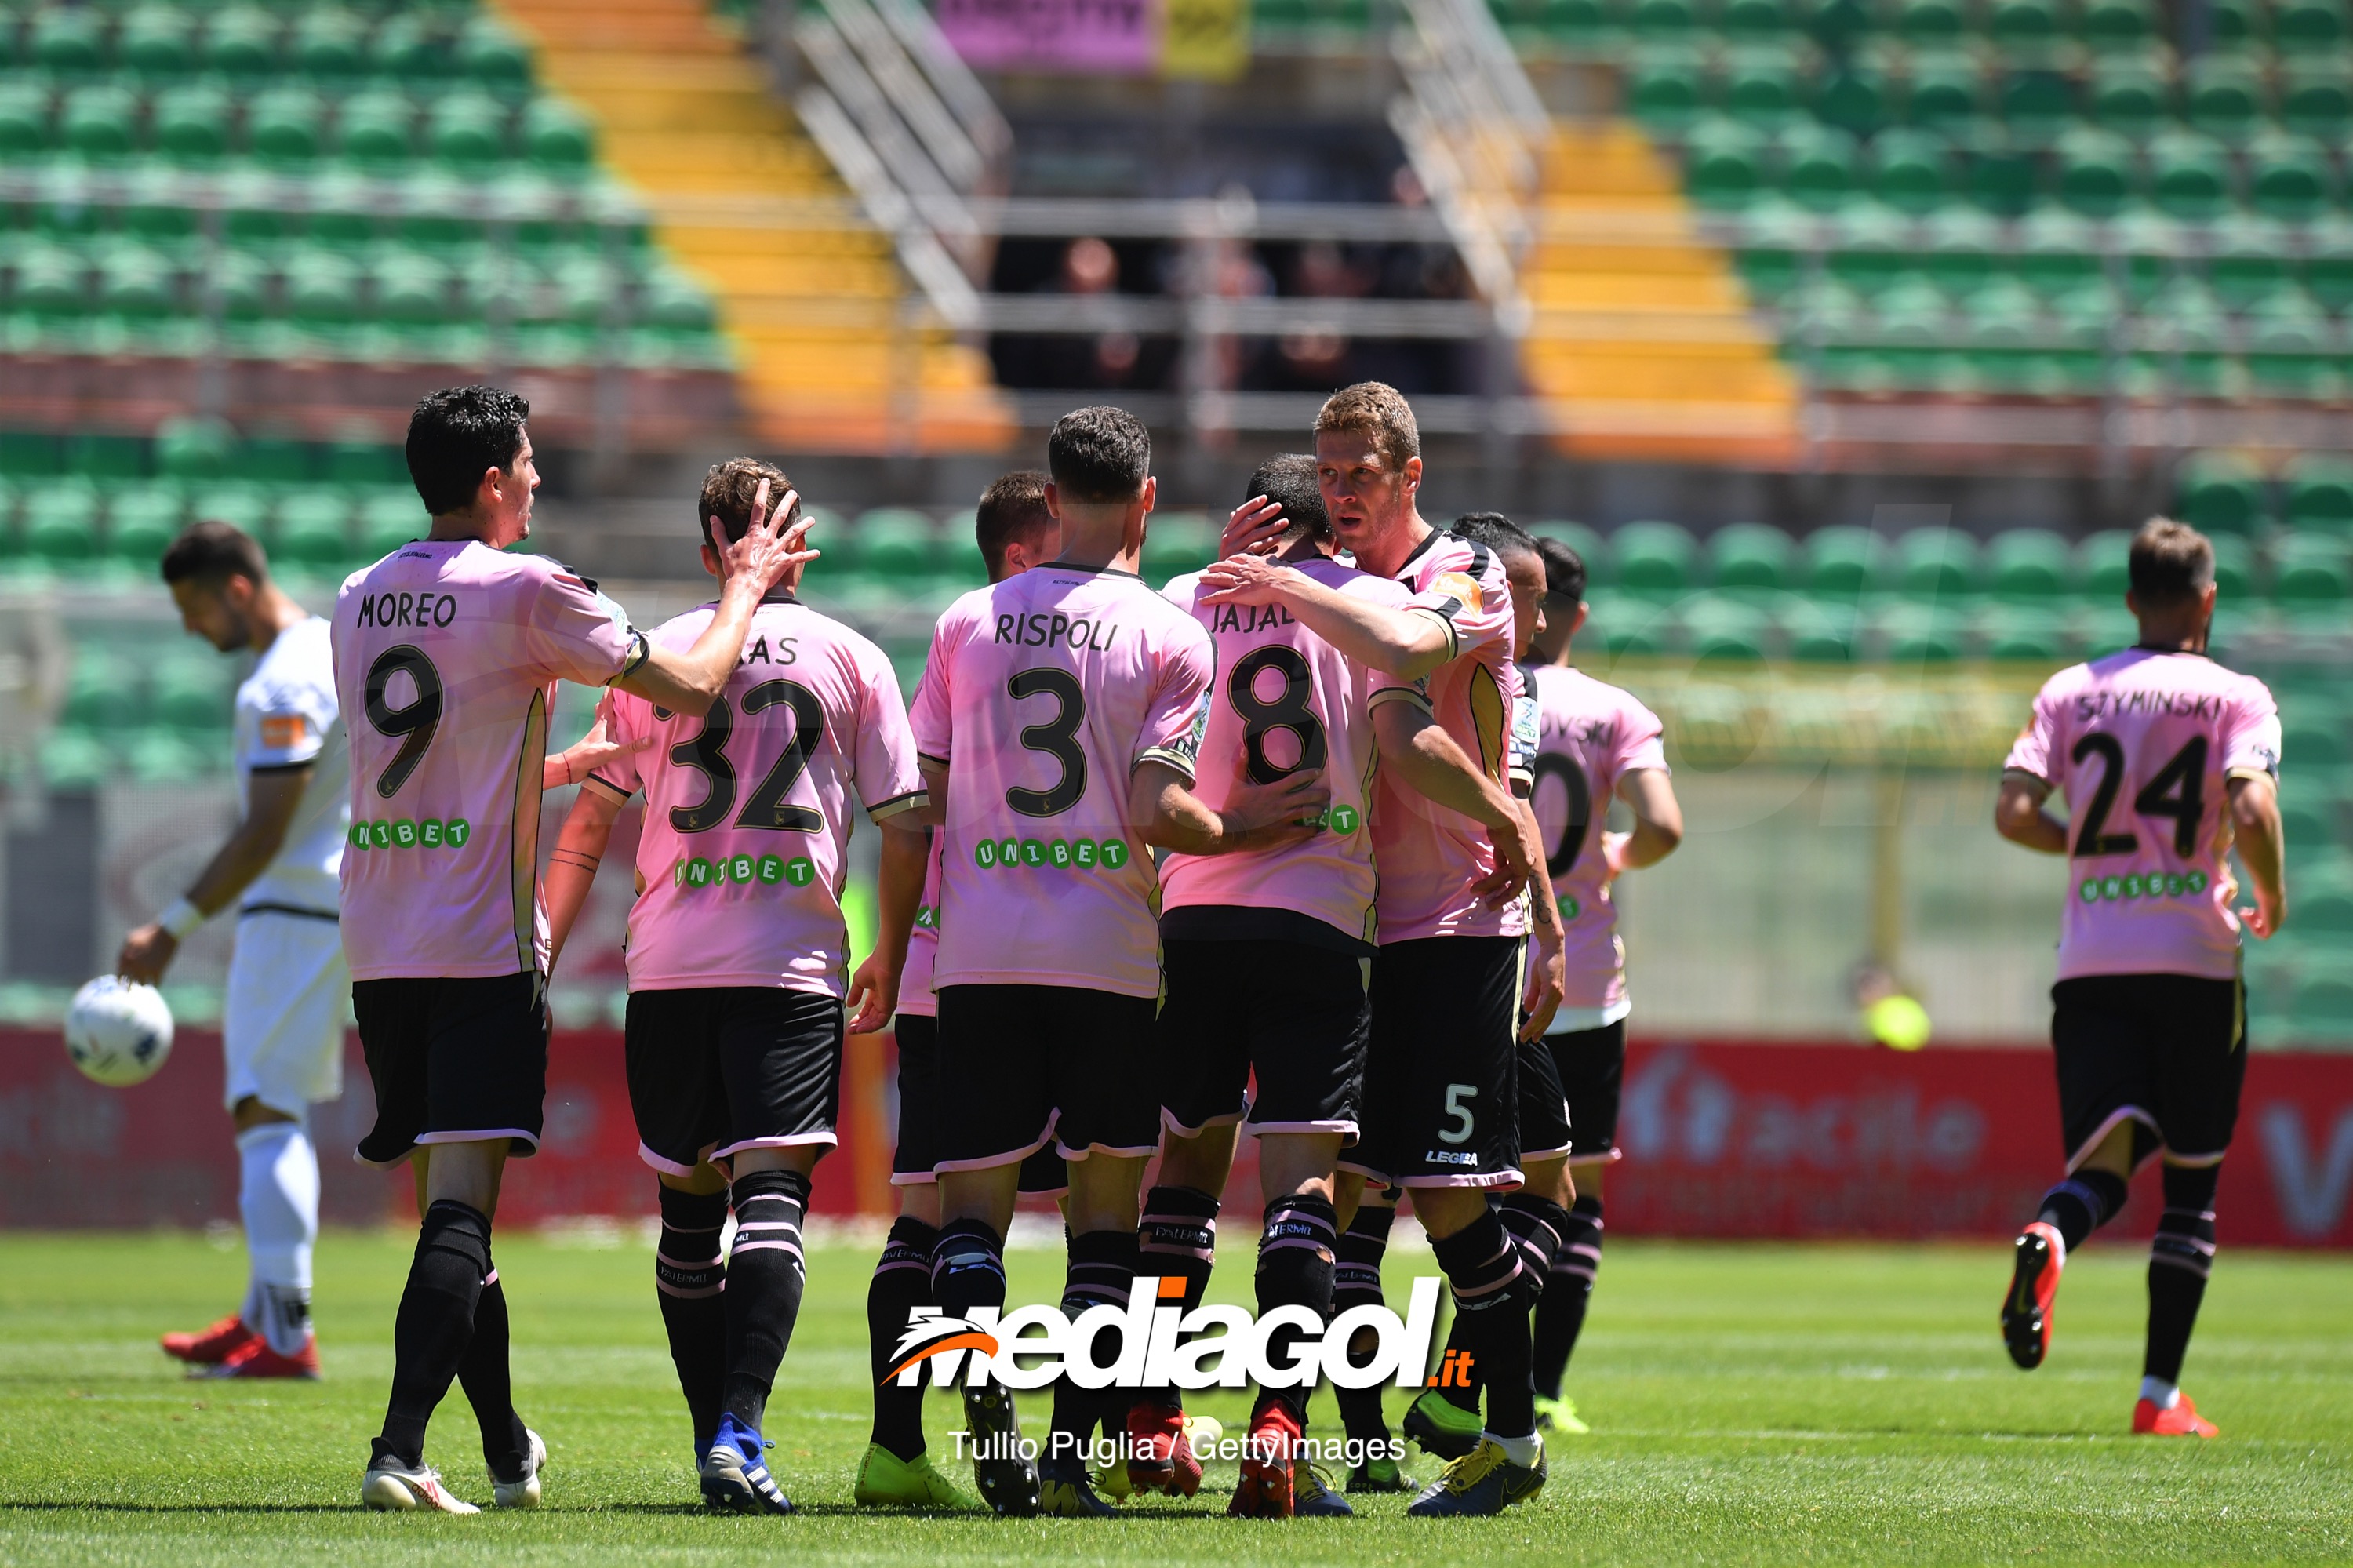 PALERMO, ITALY - MAY 01: Mato Jajalo of Palermo celebrates with his team mates after scoring the equalizing goal during the Serie B match between US Citta di Palermo and AC Spezia at Stadio Renzo Barbera on May 01, 2019 in Palermo, Italy. (Photo by Tullio M. Puglia/Getty Images)